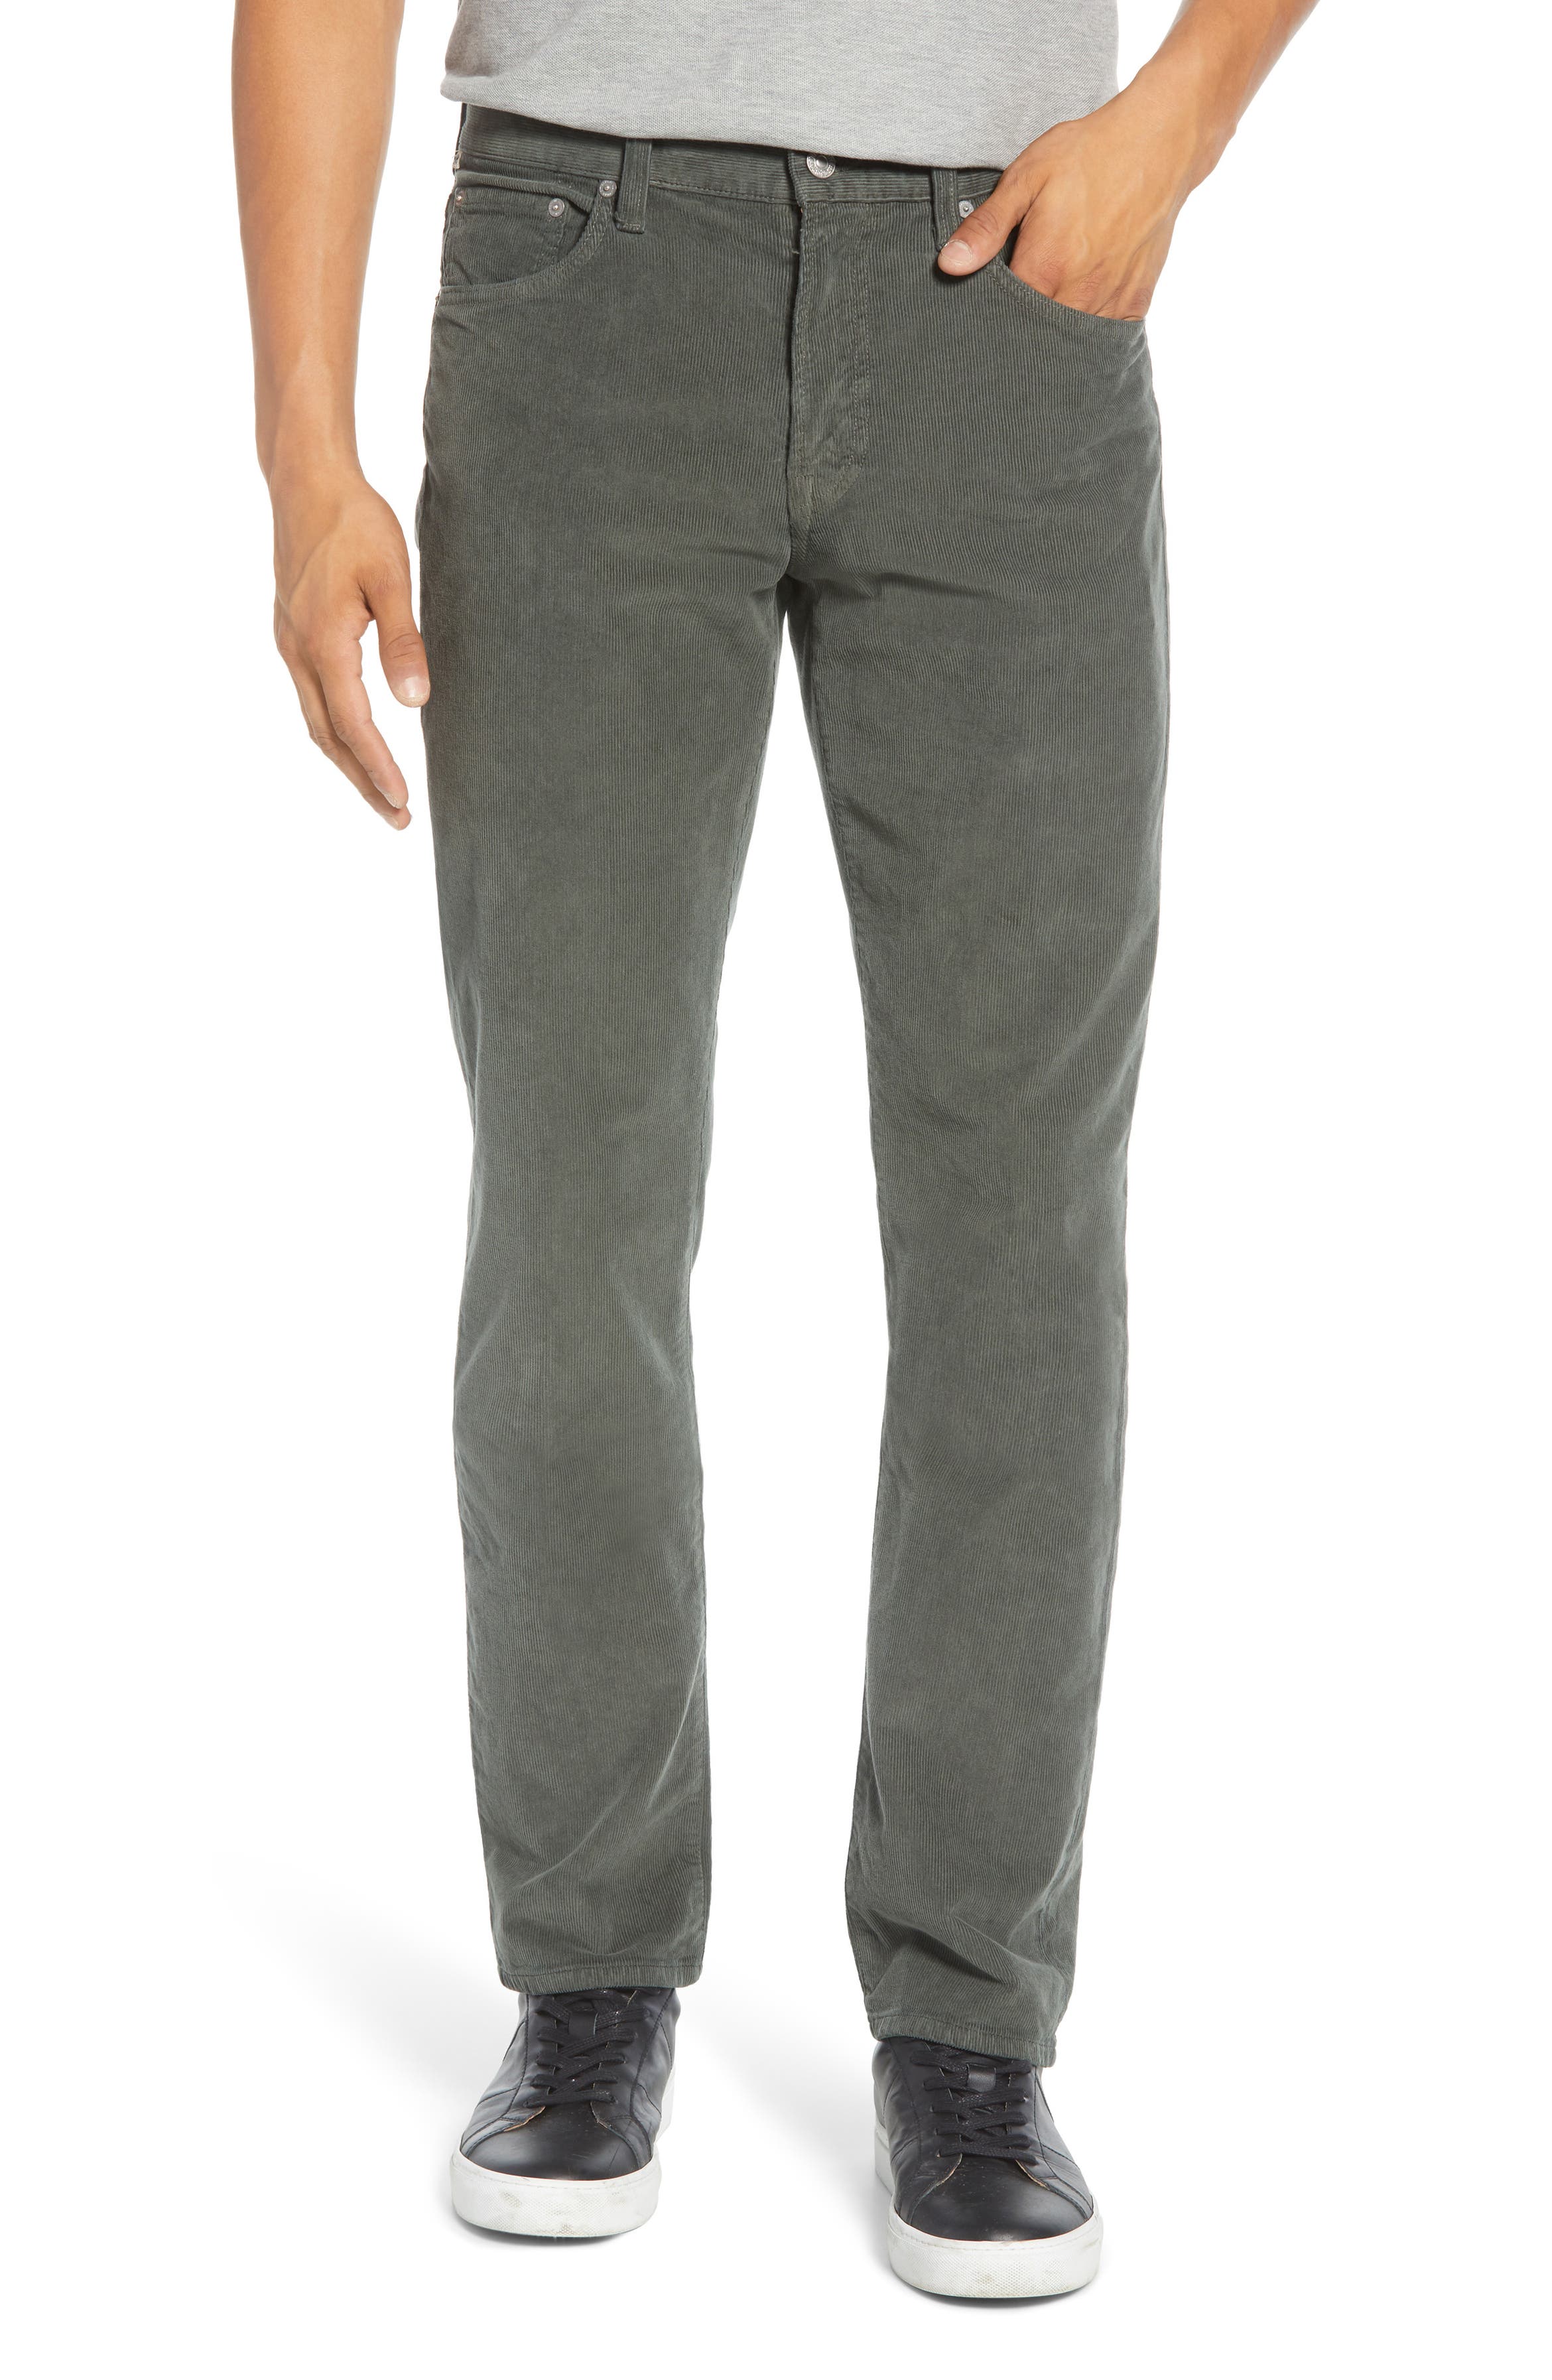 Citizens of Humanity Gage Slim Straight Leg Corduroy Jeans | Nordstrom